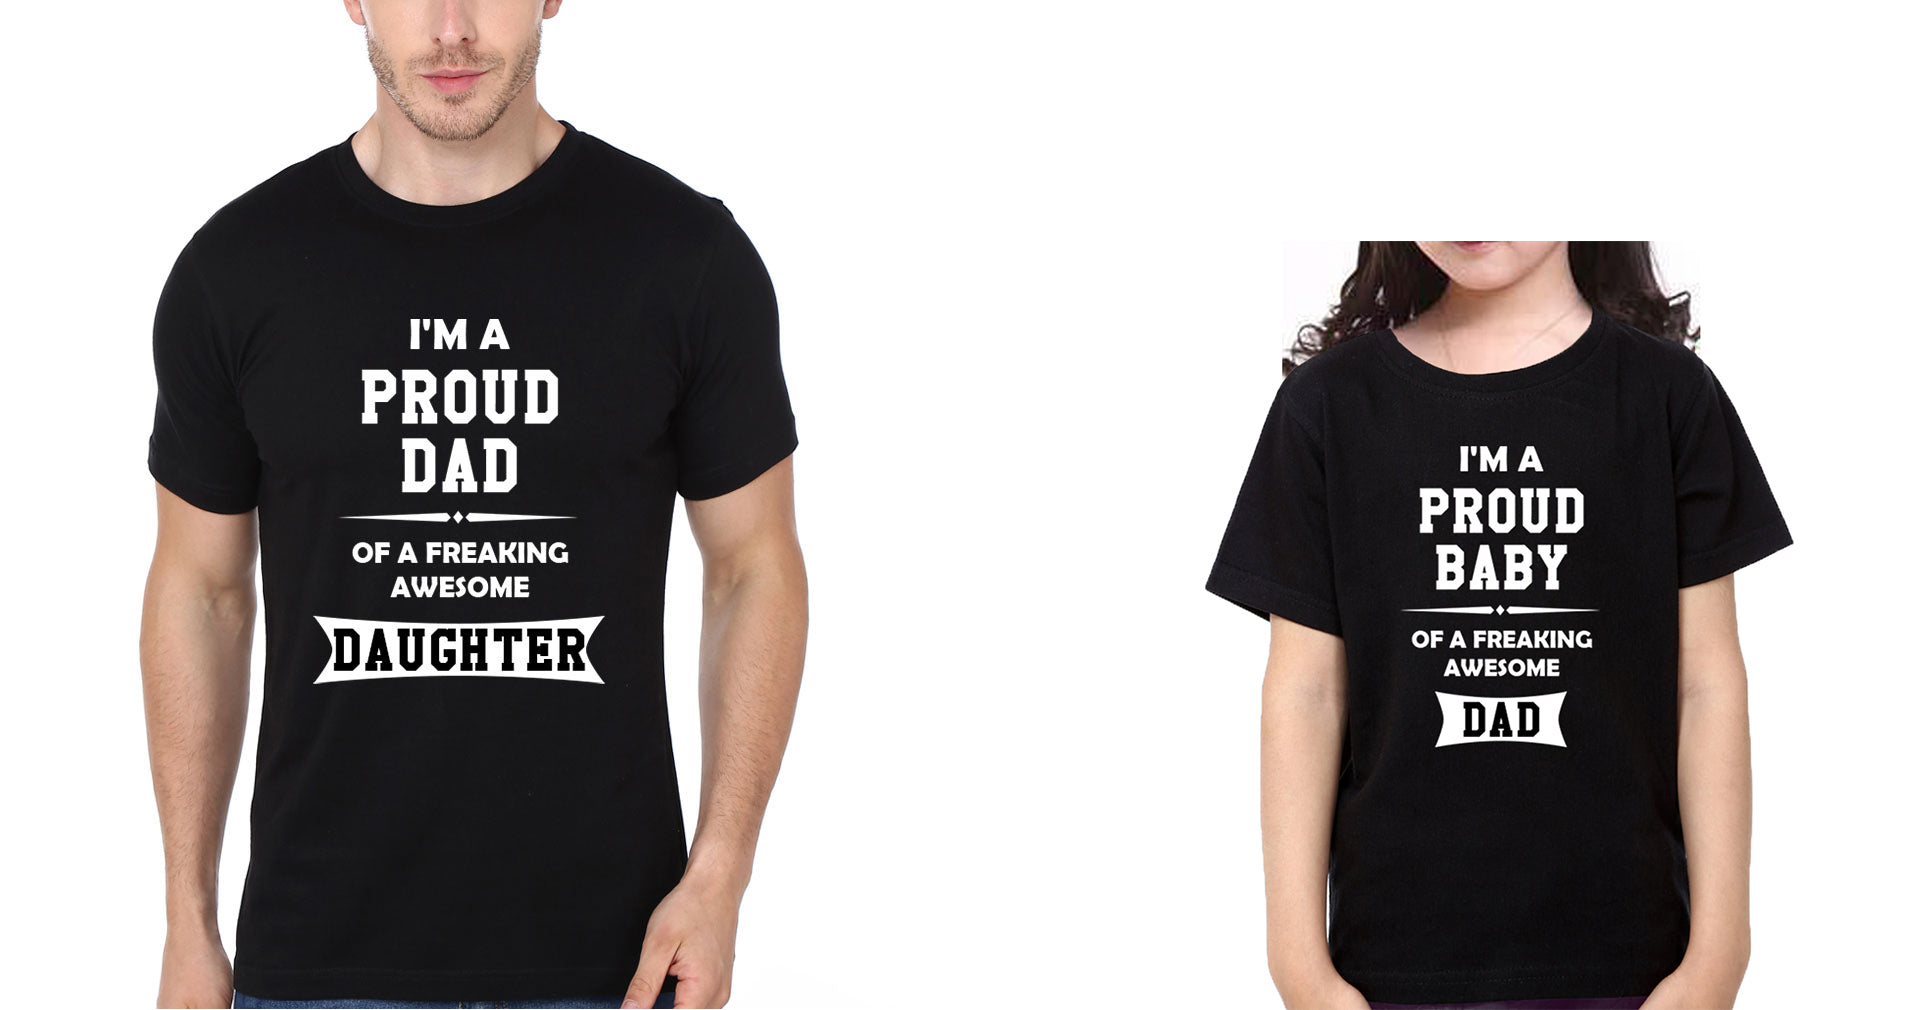 I'M A Proud Dad I'M A Proud Baby Father and Daughter Matching T-Shirt- FunkyTradition